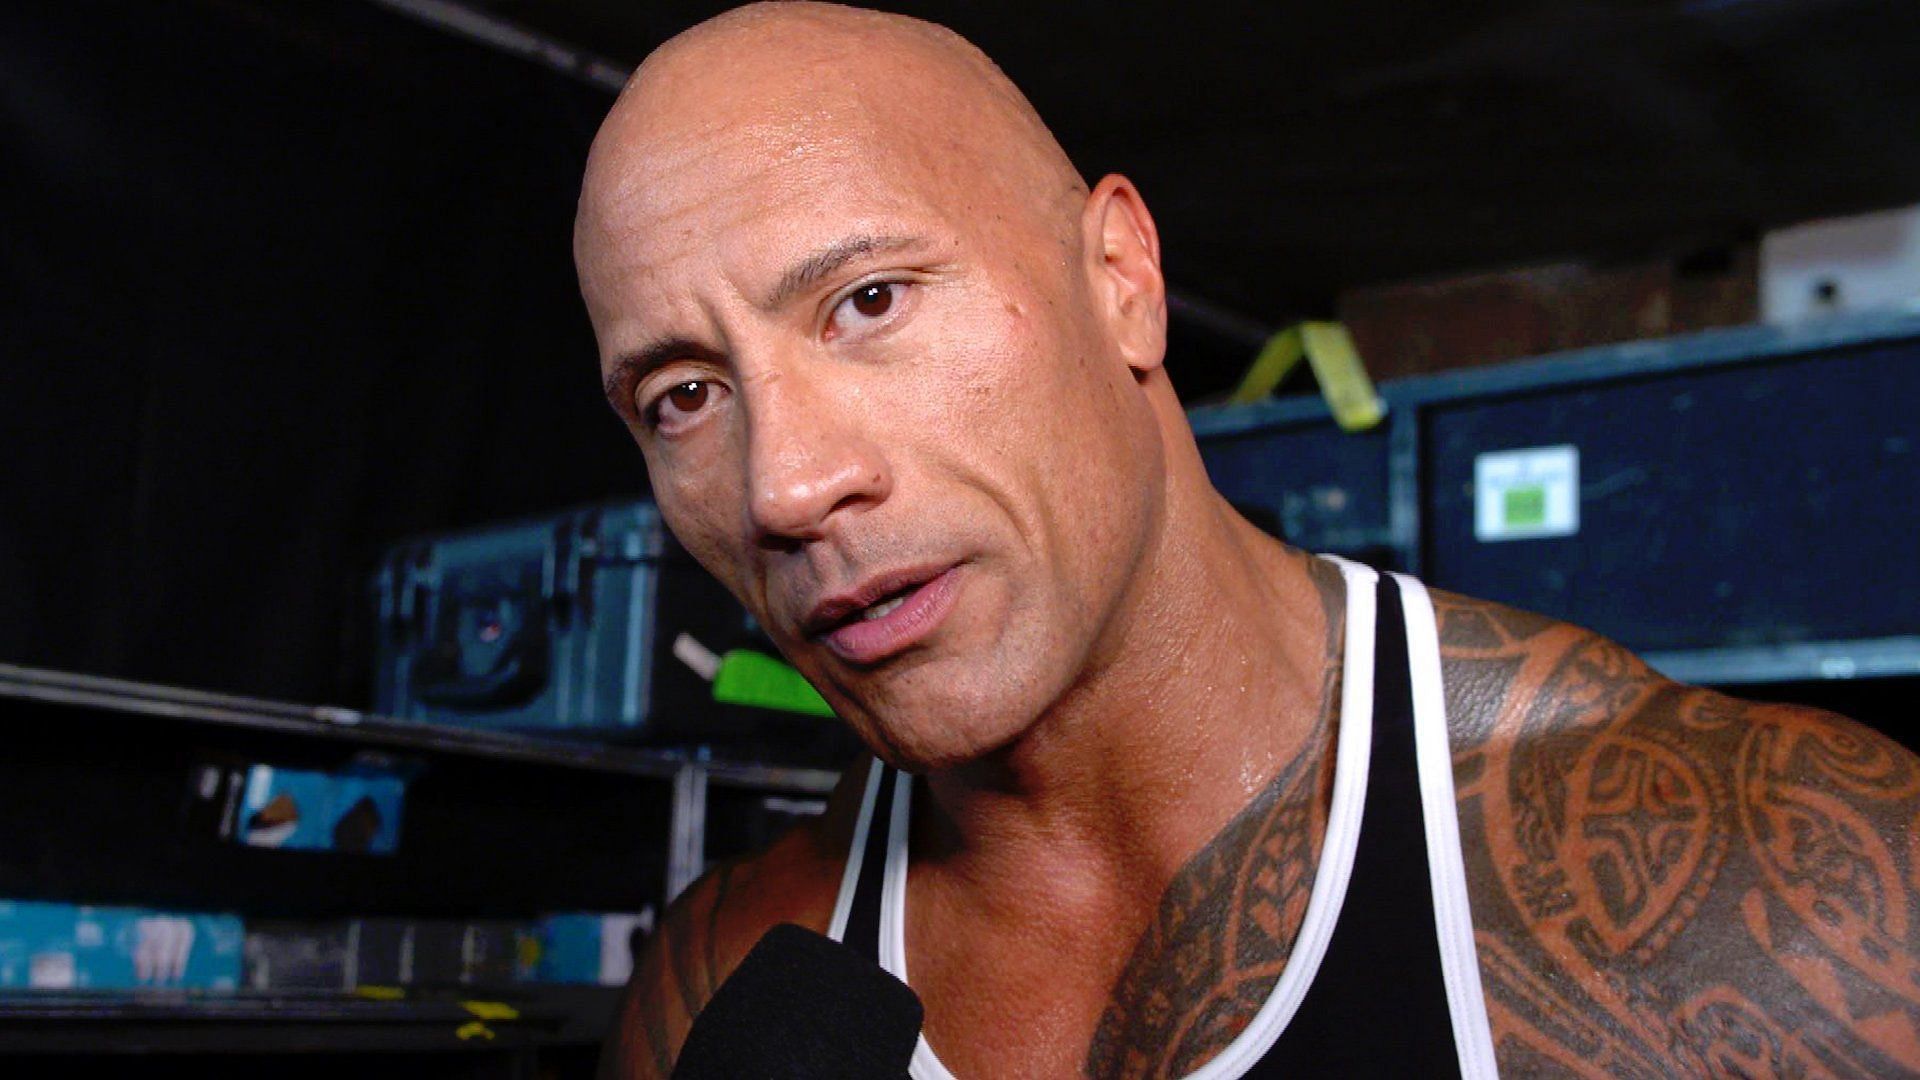 A former star commented on his loss to The Rock